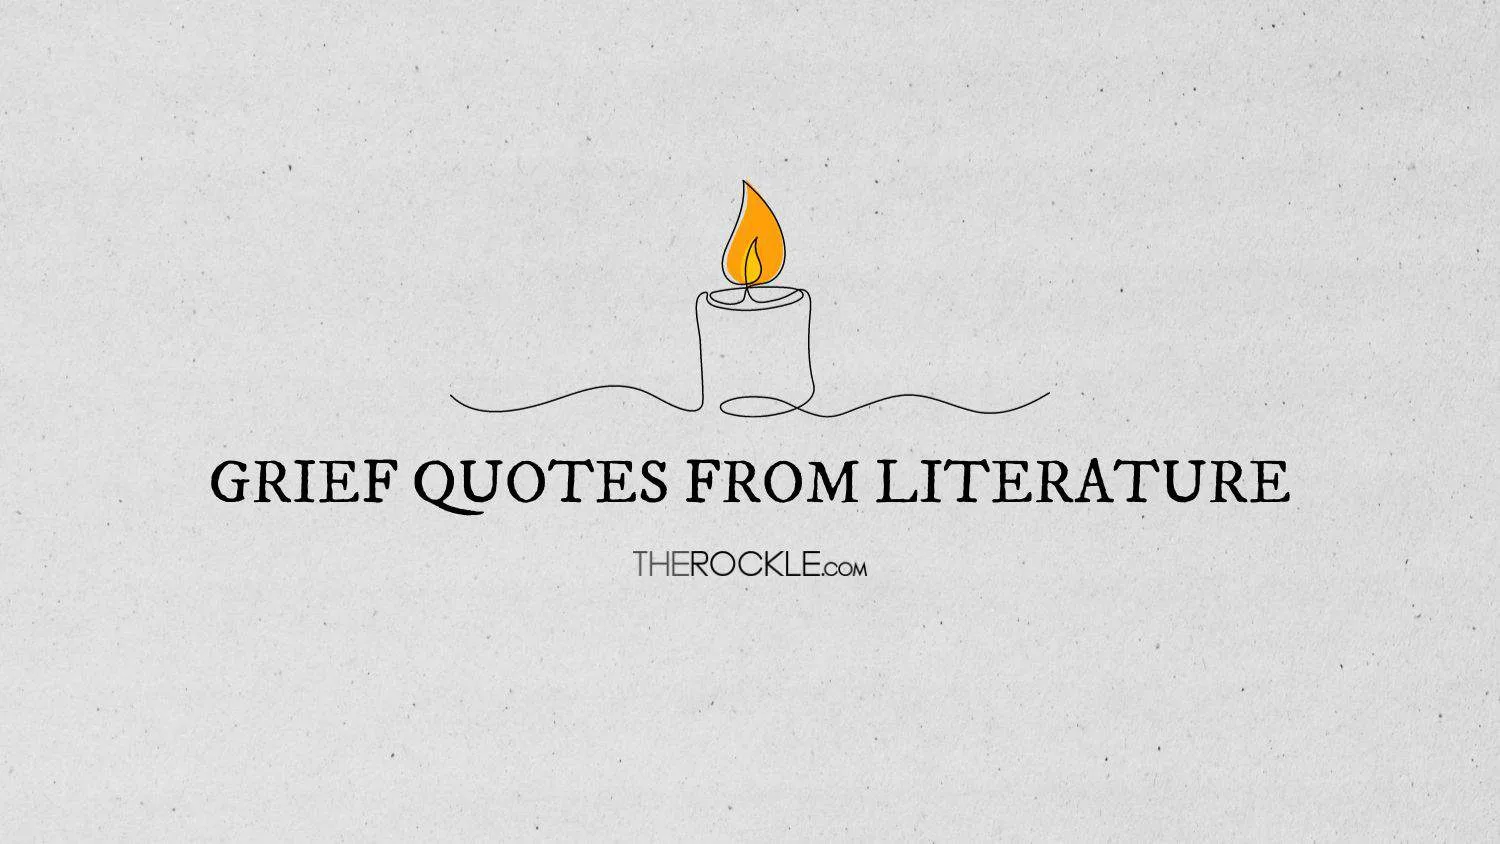 Grief quotes from literature